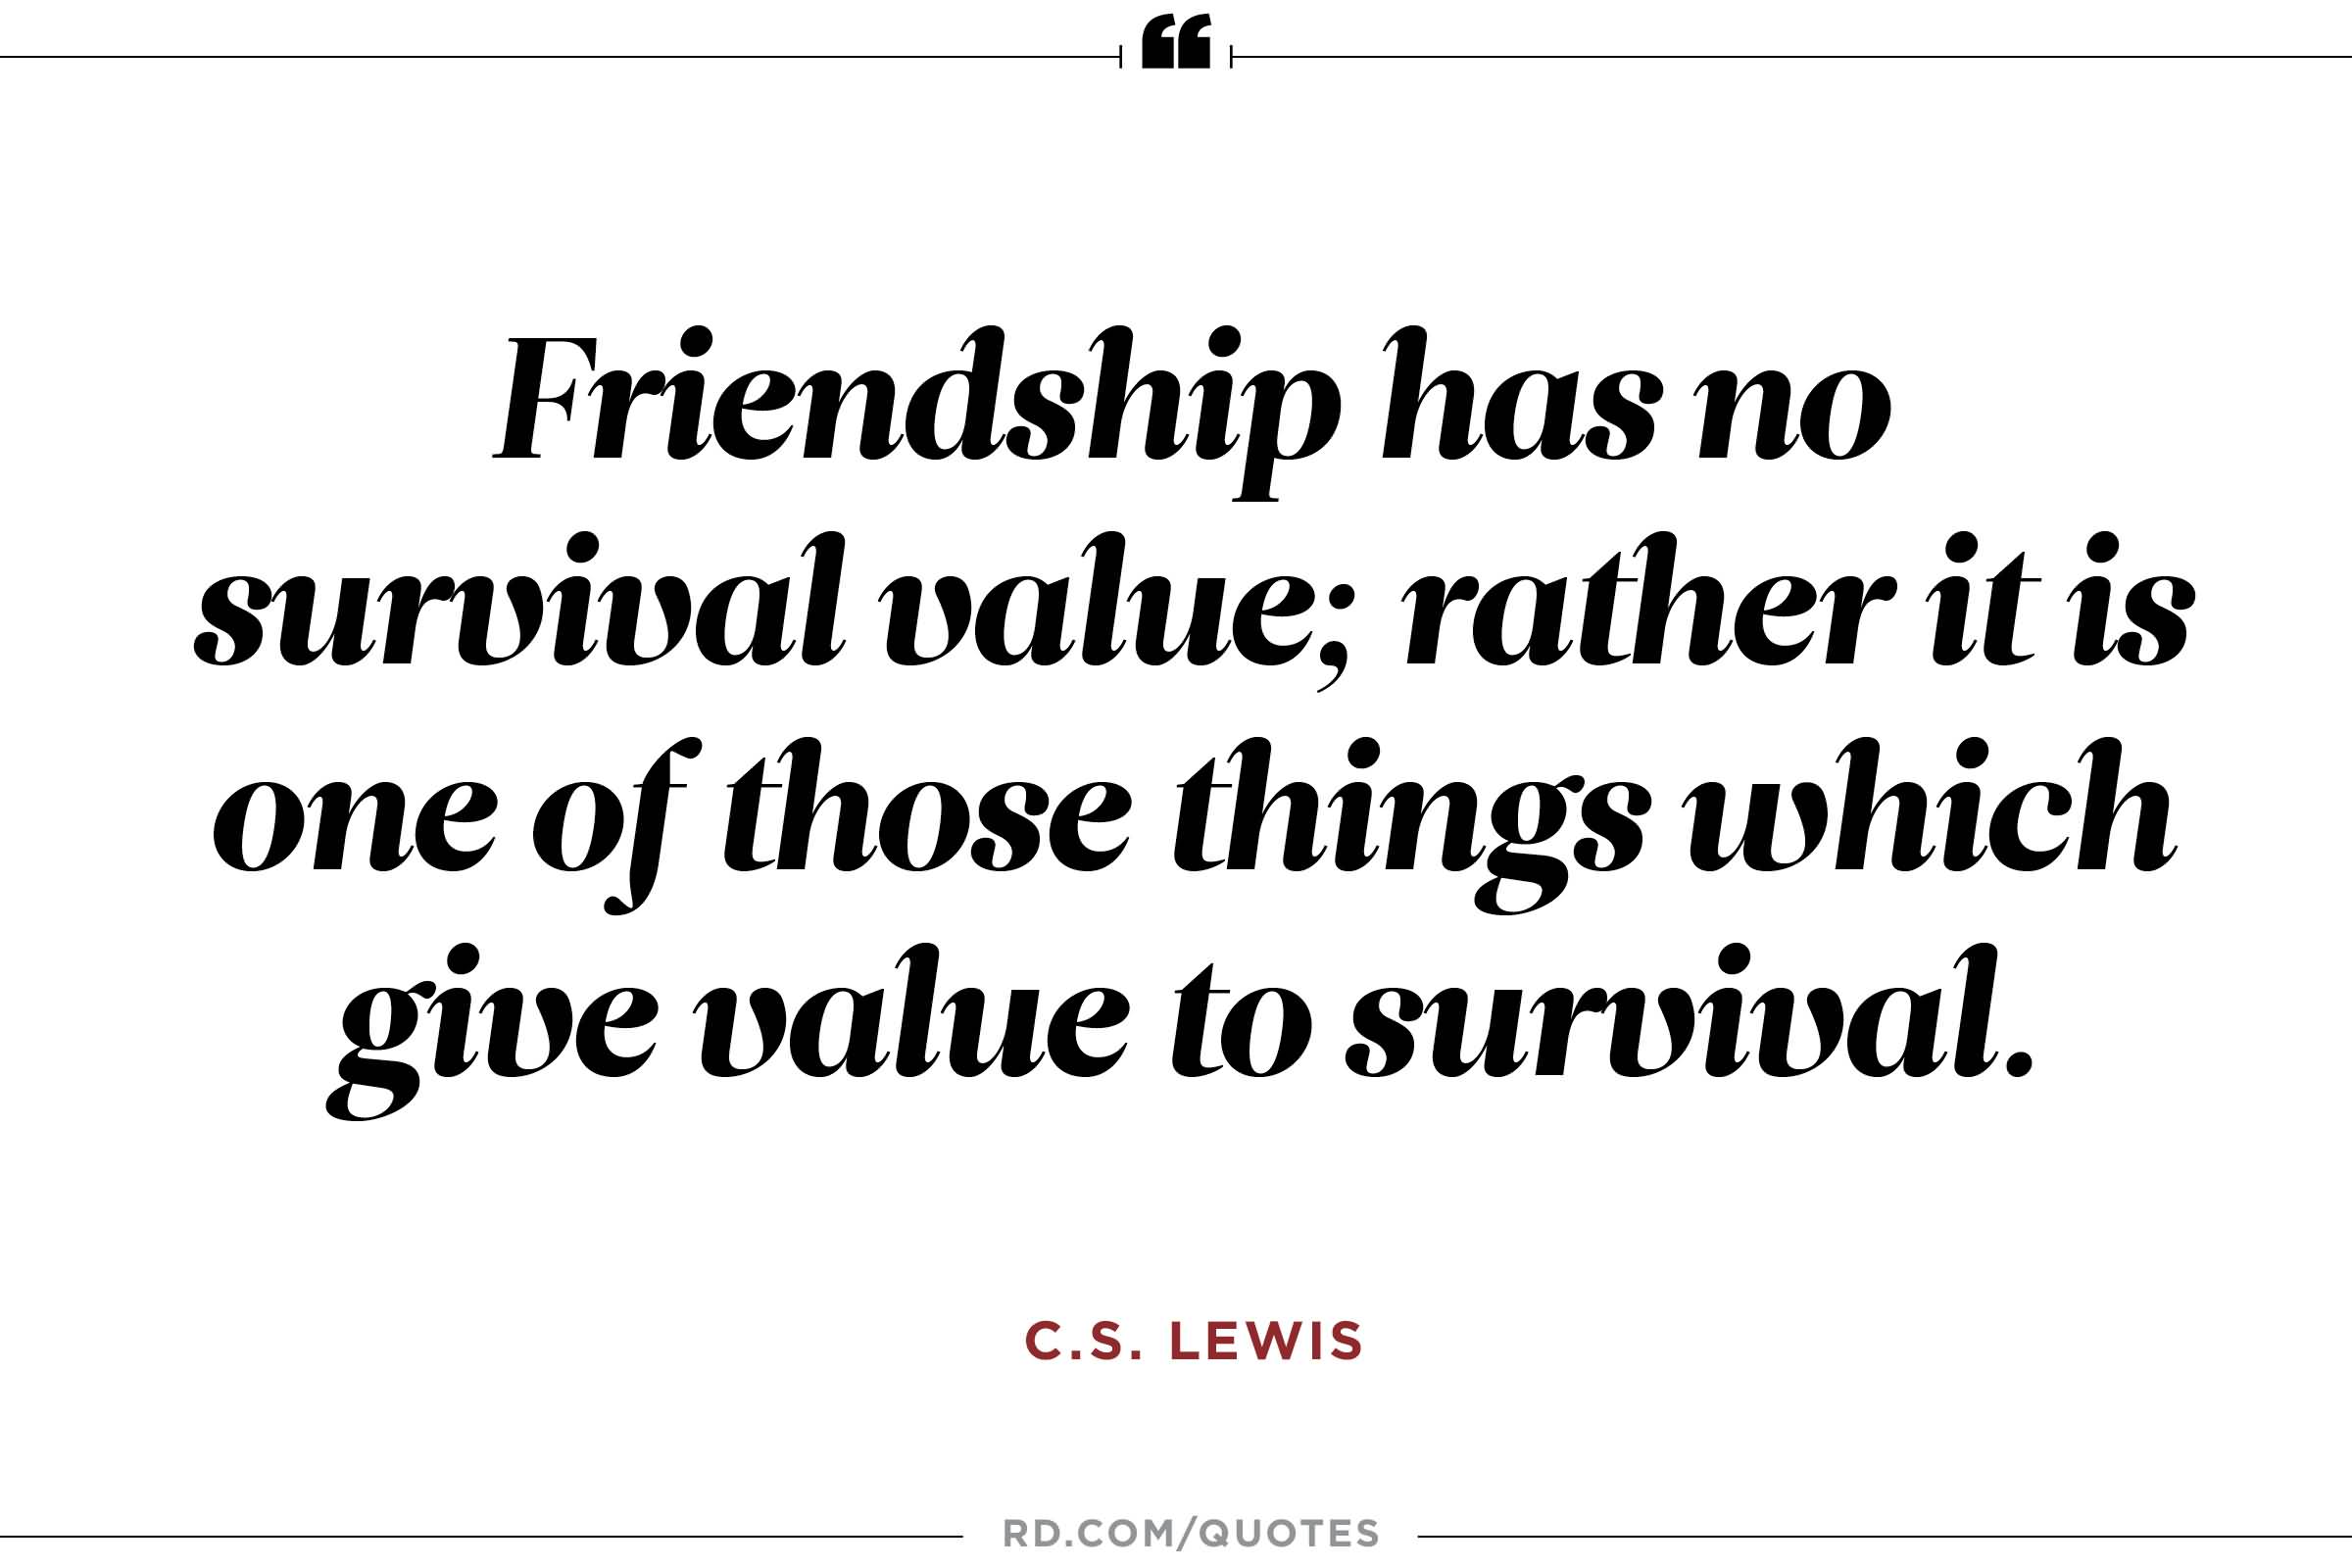 Cs Lewis Quote About Friendship 10